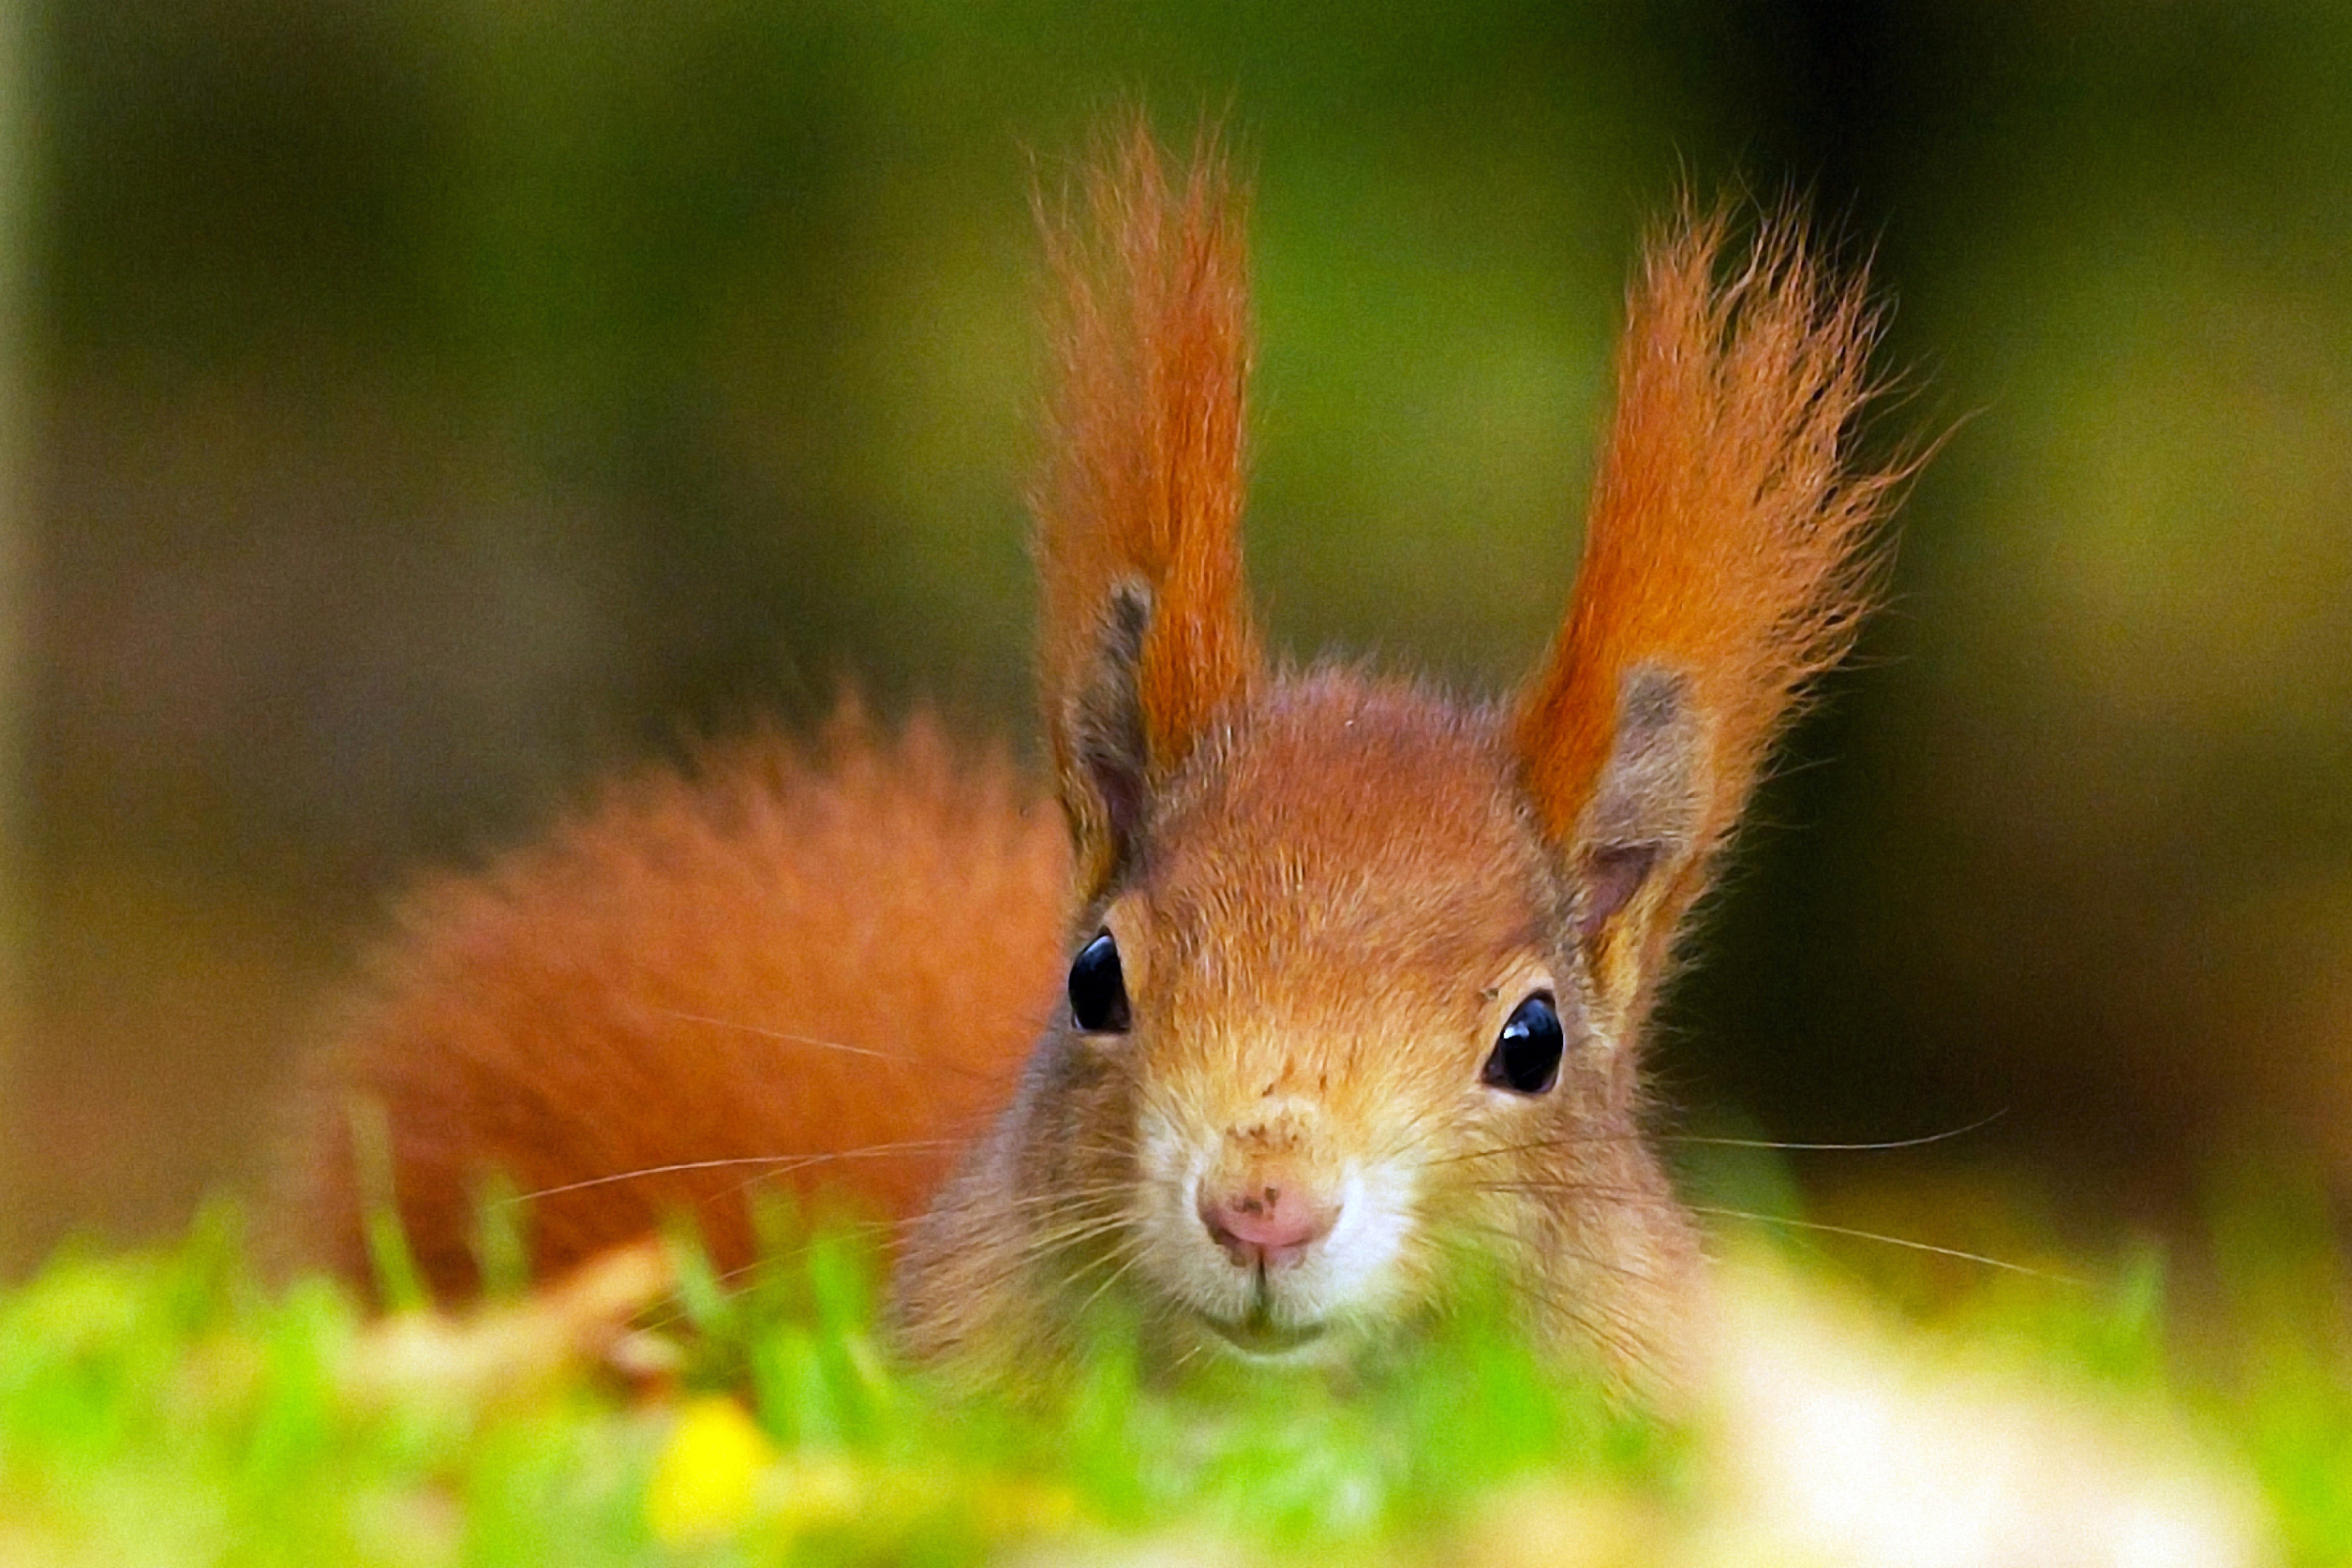 Funny Little Squirrel wallpaper 2880x1920